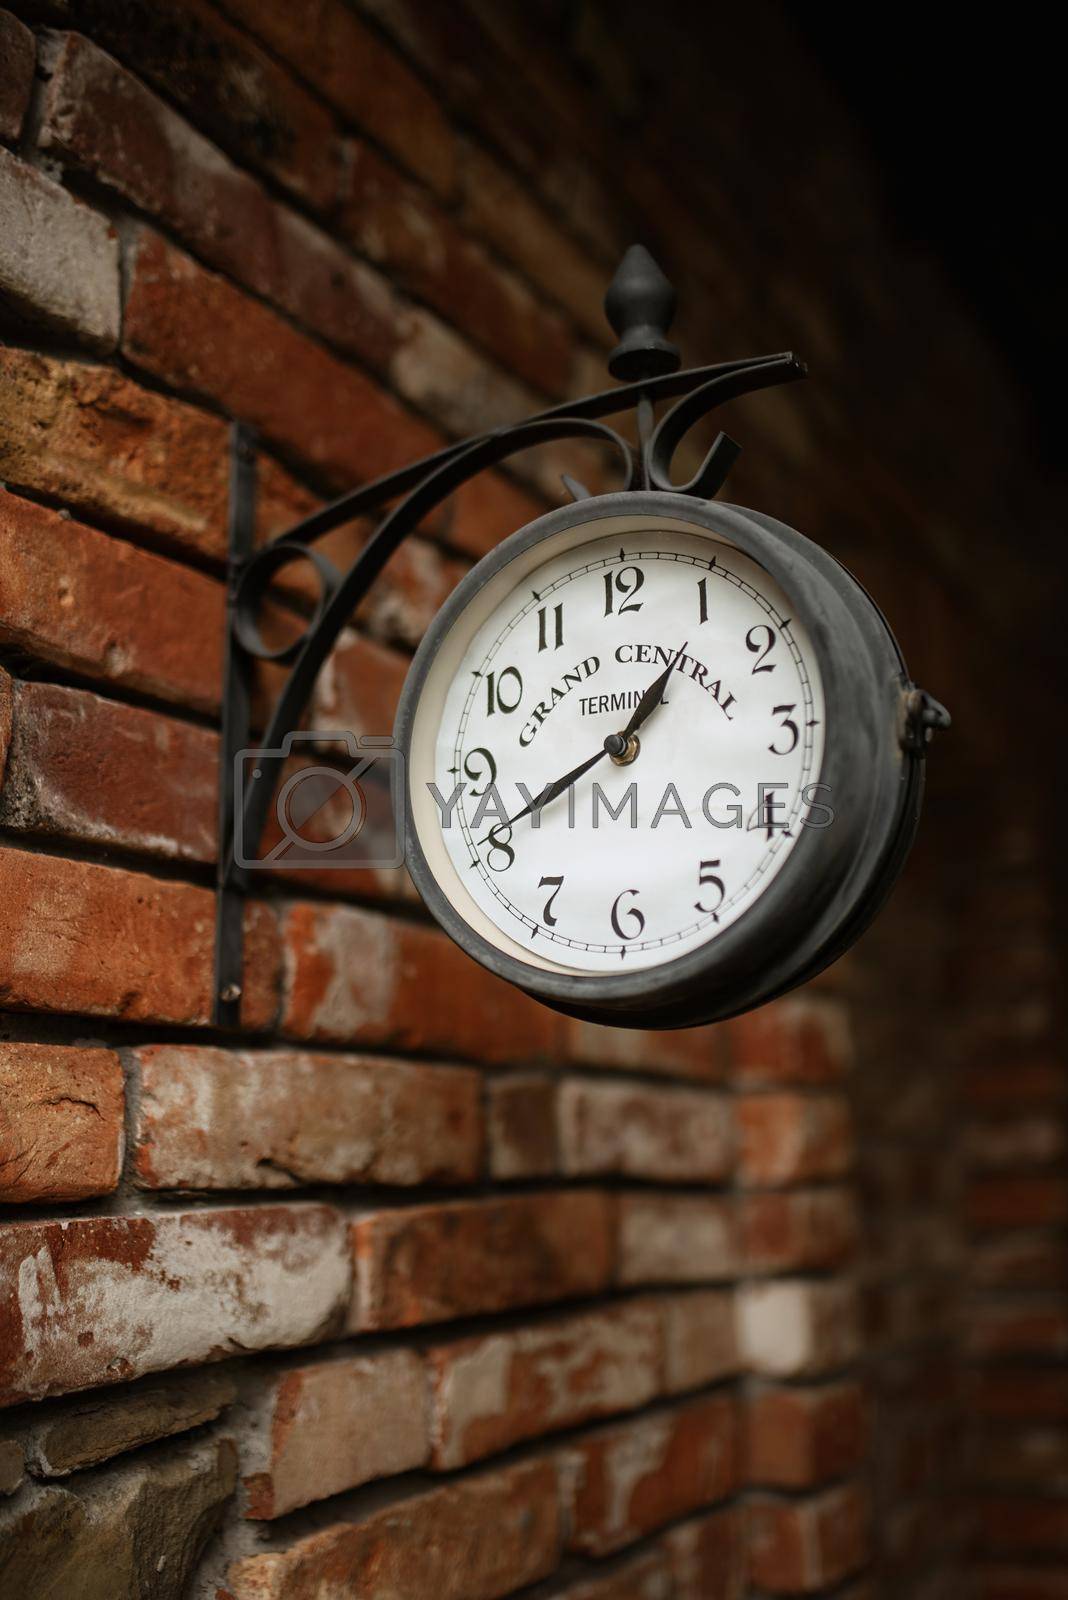 Royalty free image of old station clock by Andreua